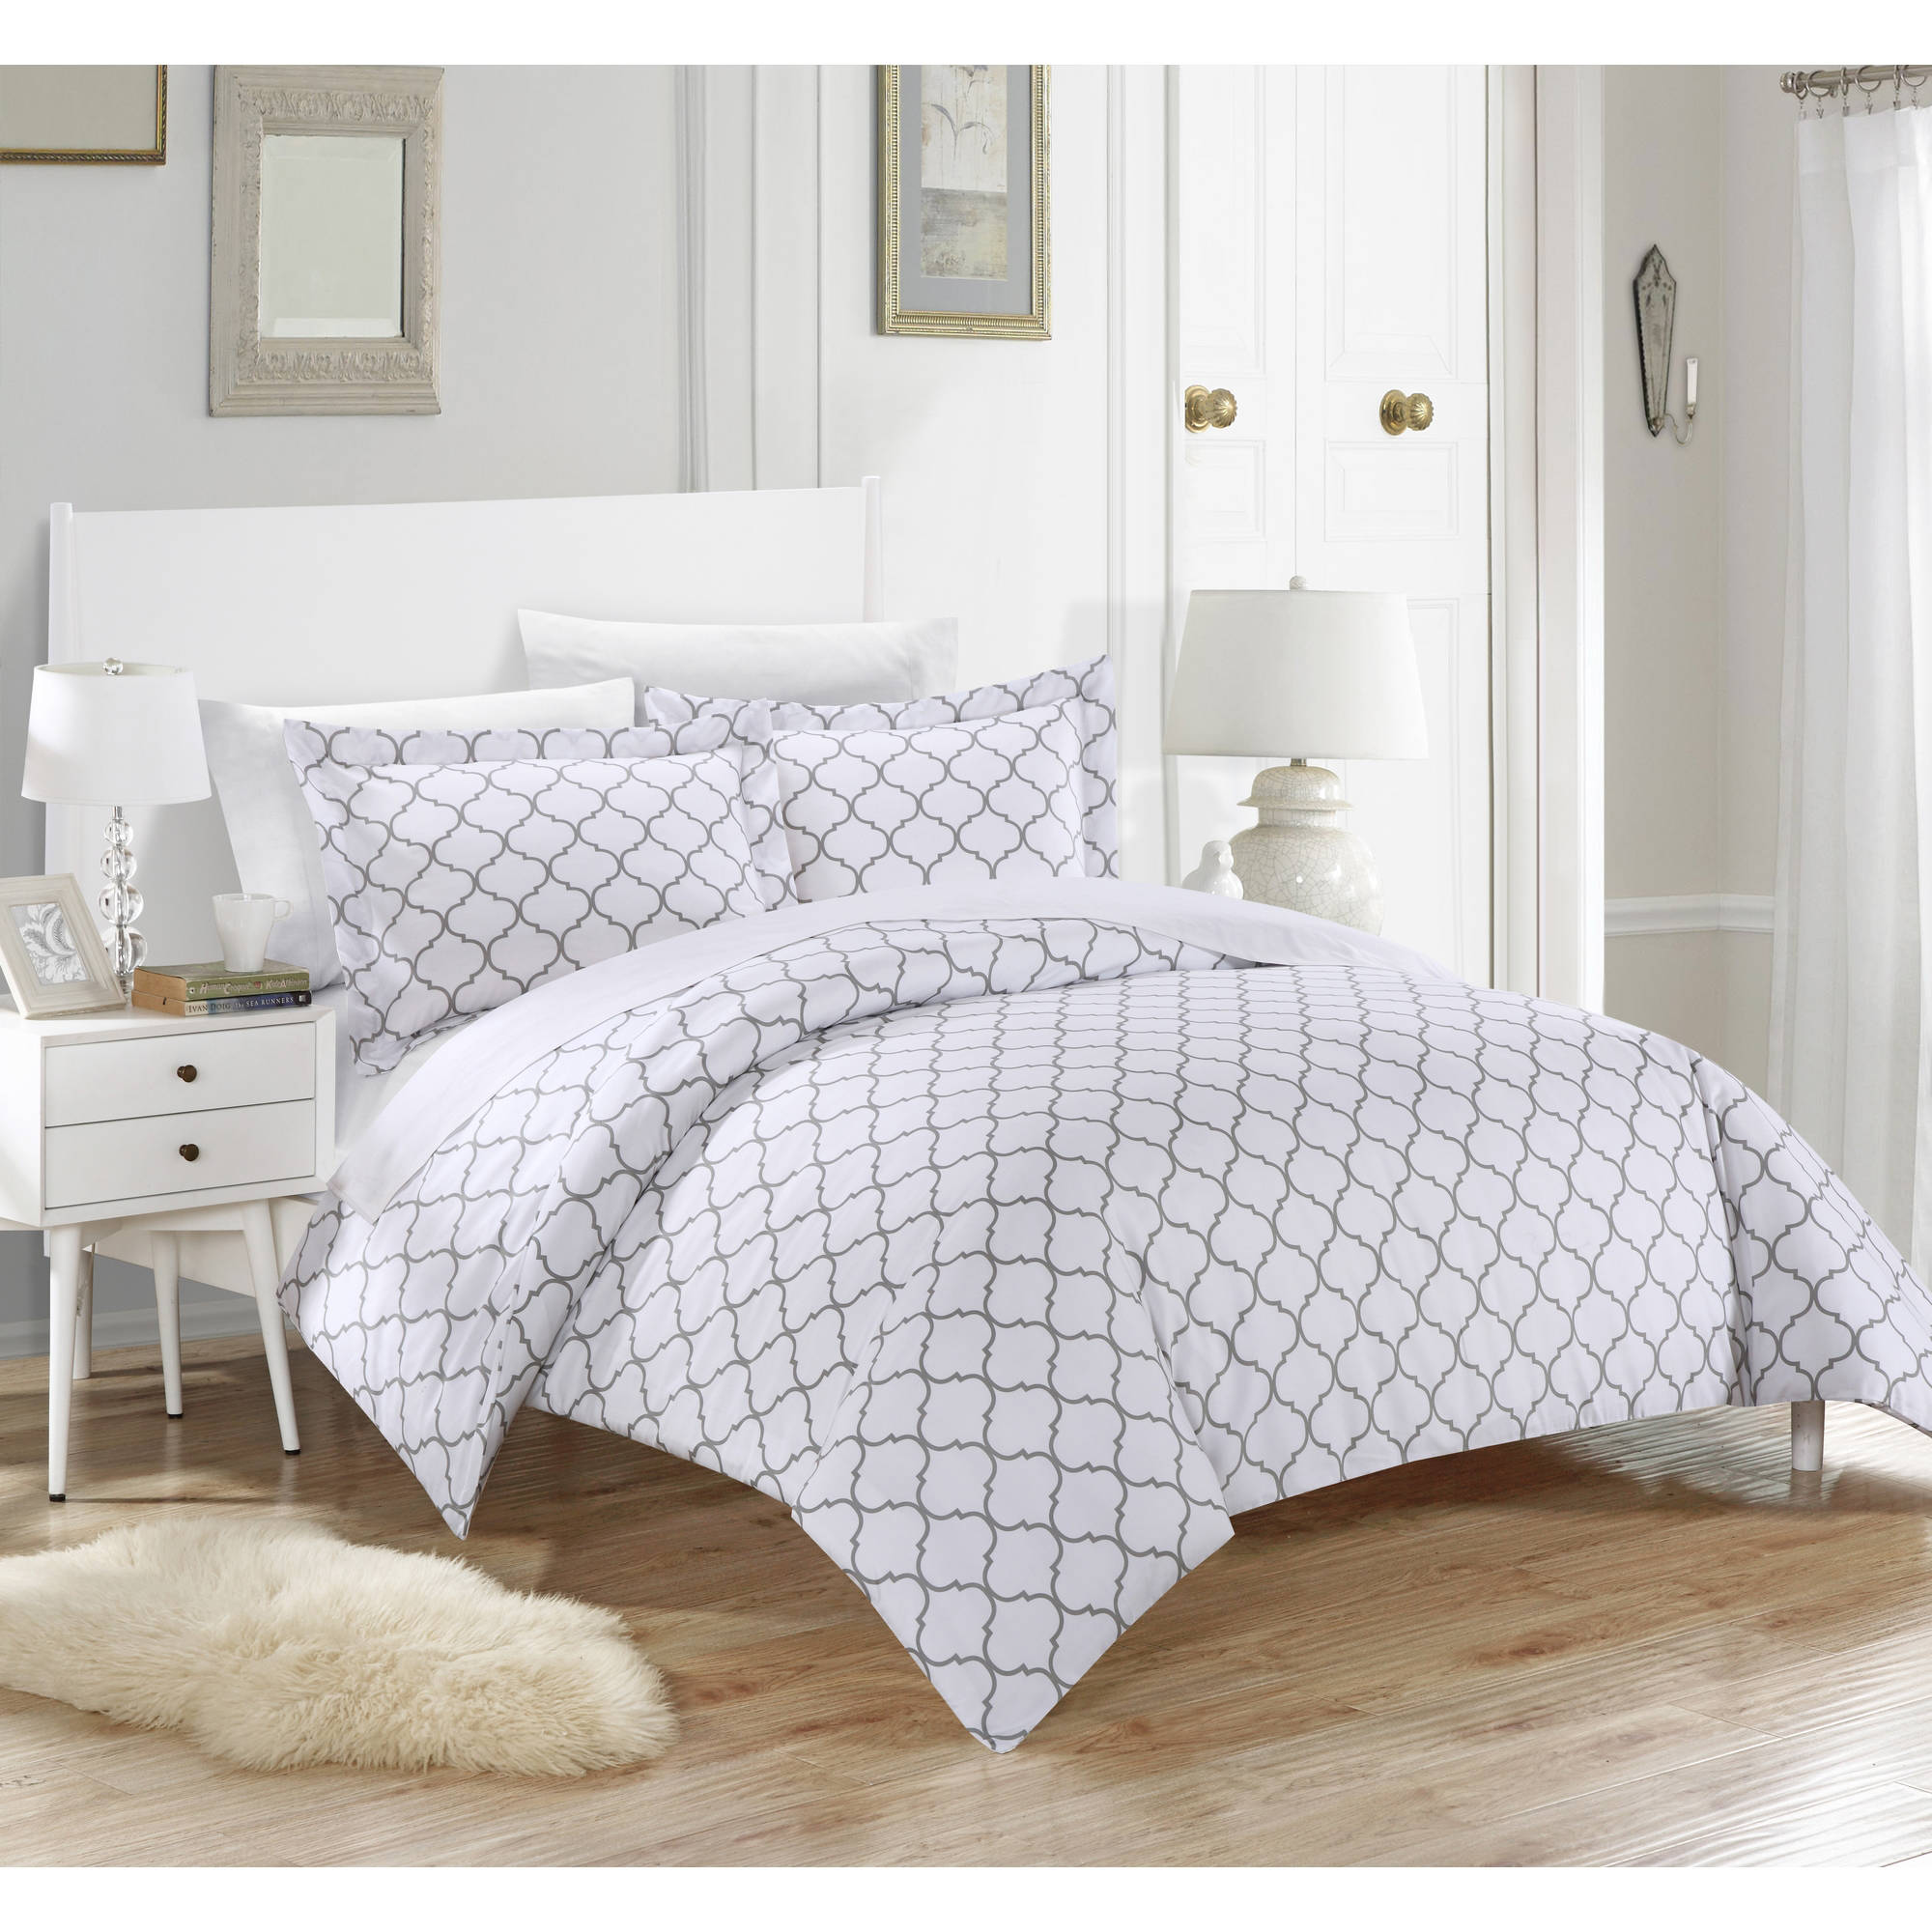 Chic Home Finlay 2-Piece Reversible Geometric Duvet Cover Set, Twin, Grey - image 2 of 2